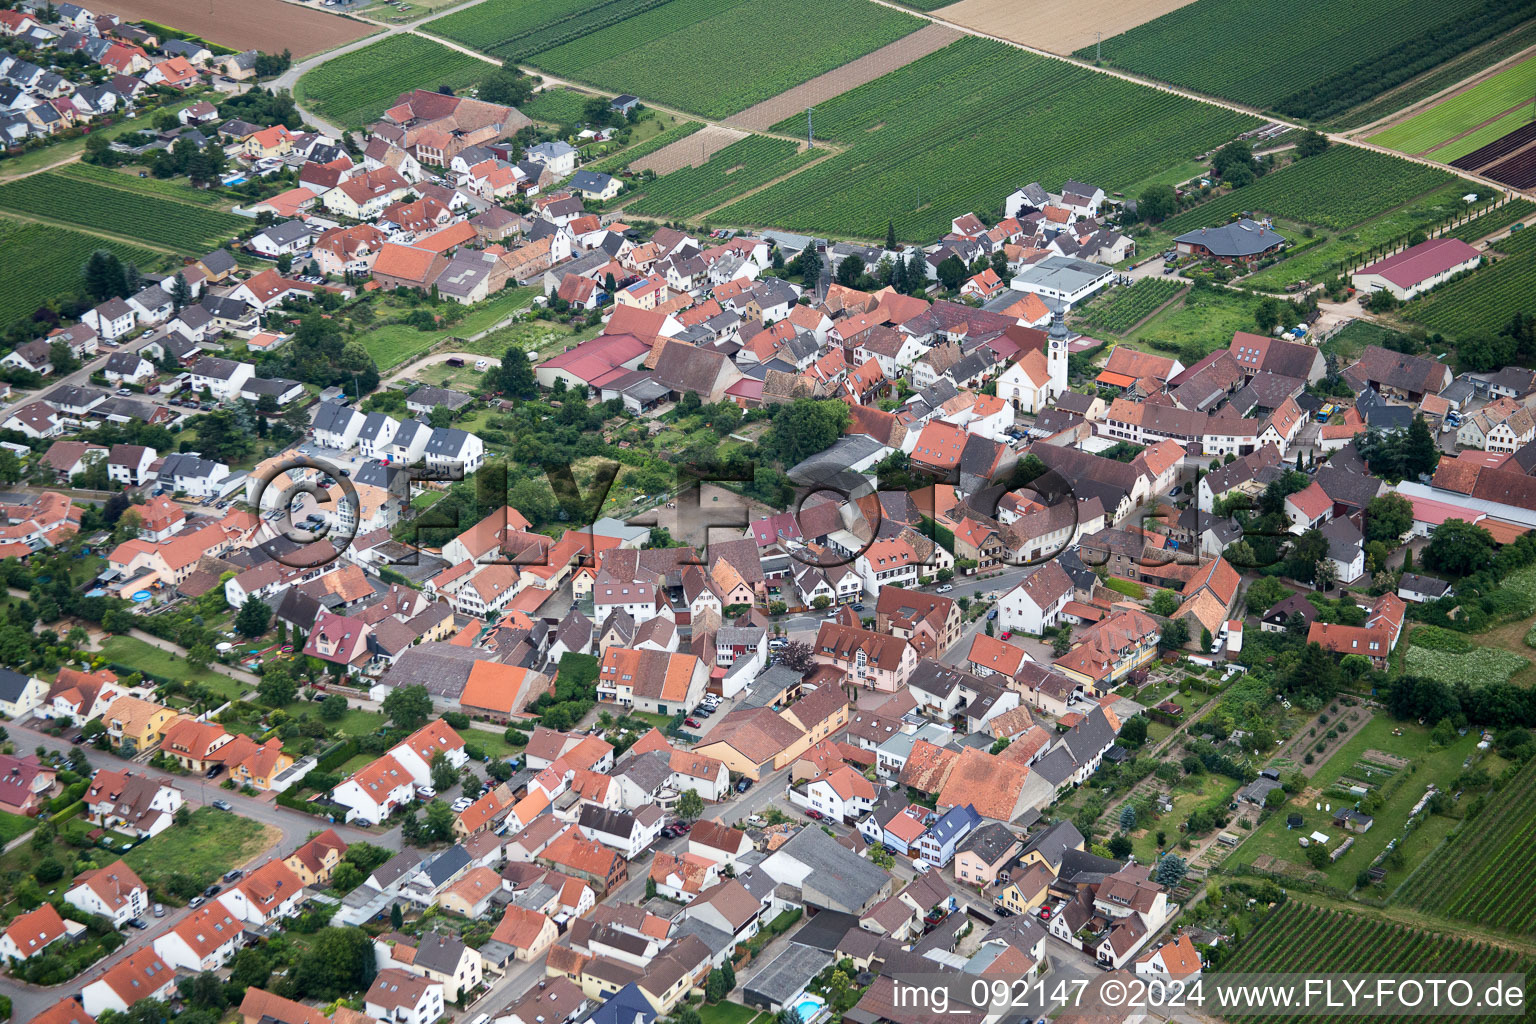 Village - view on the edge of agricultural fields and farmland in Goennheim in the state Rhineland-Palatinate, Germany